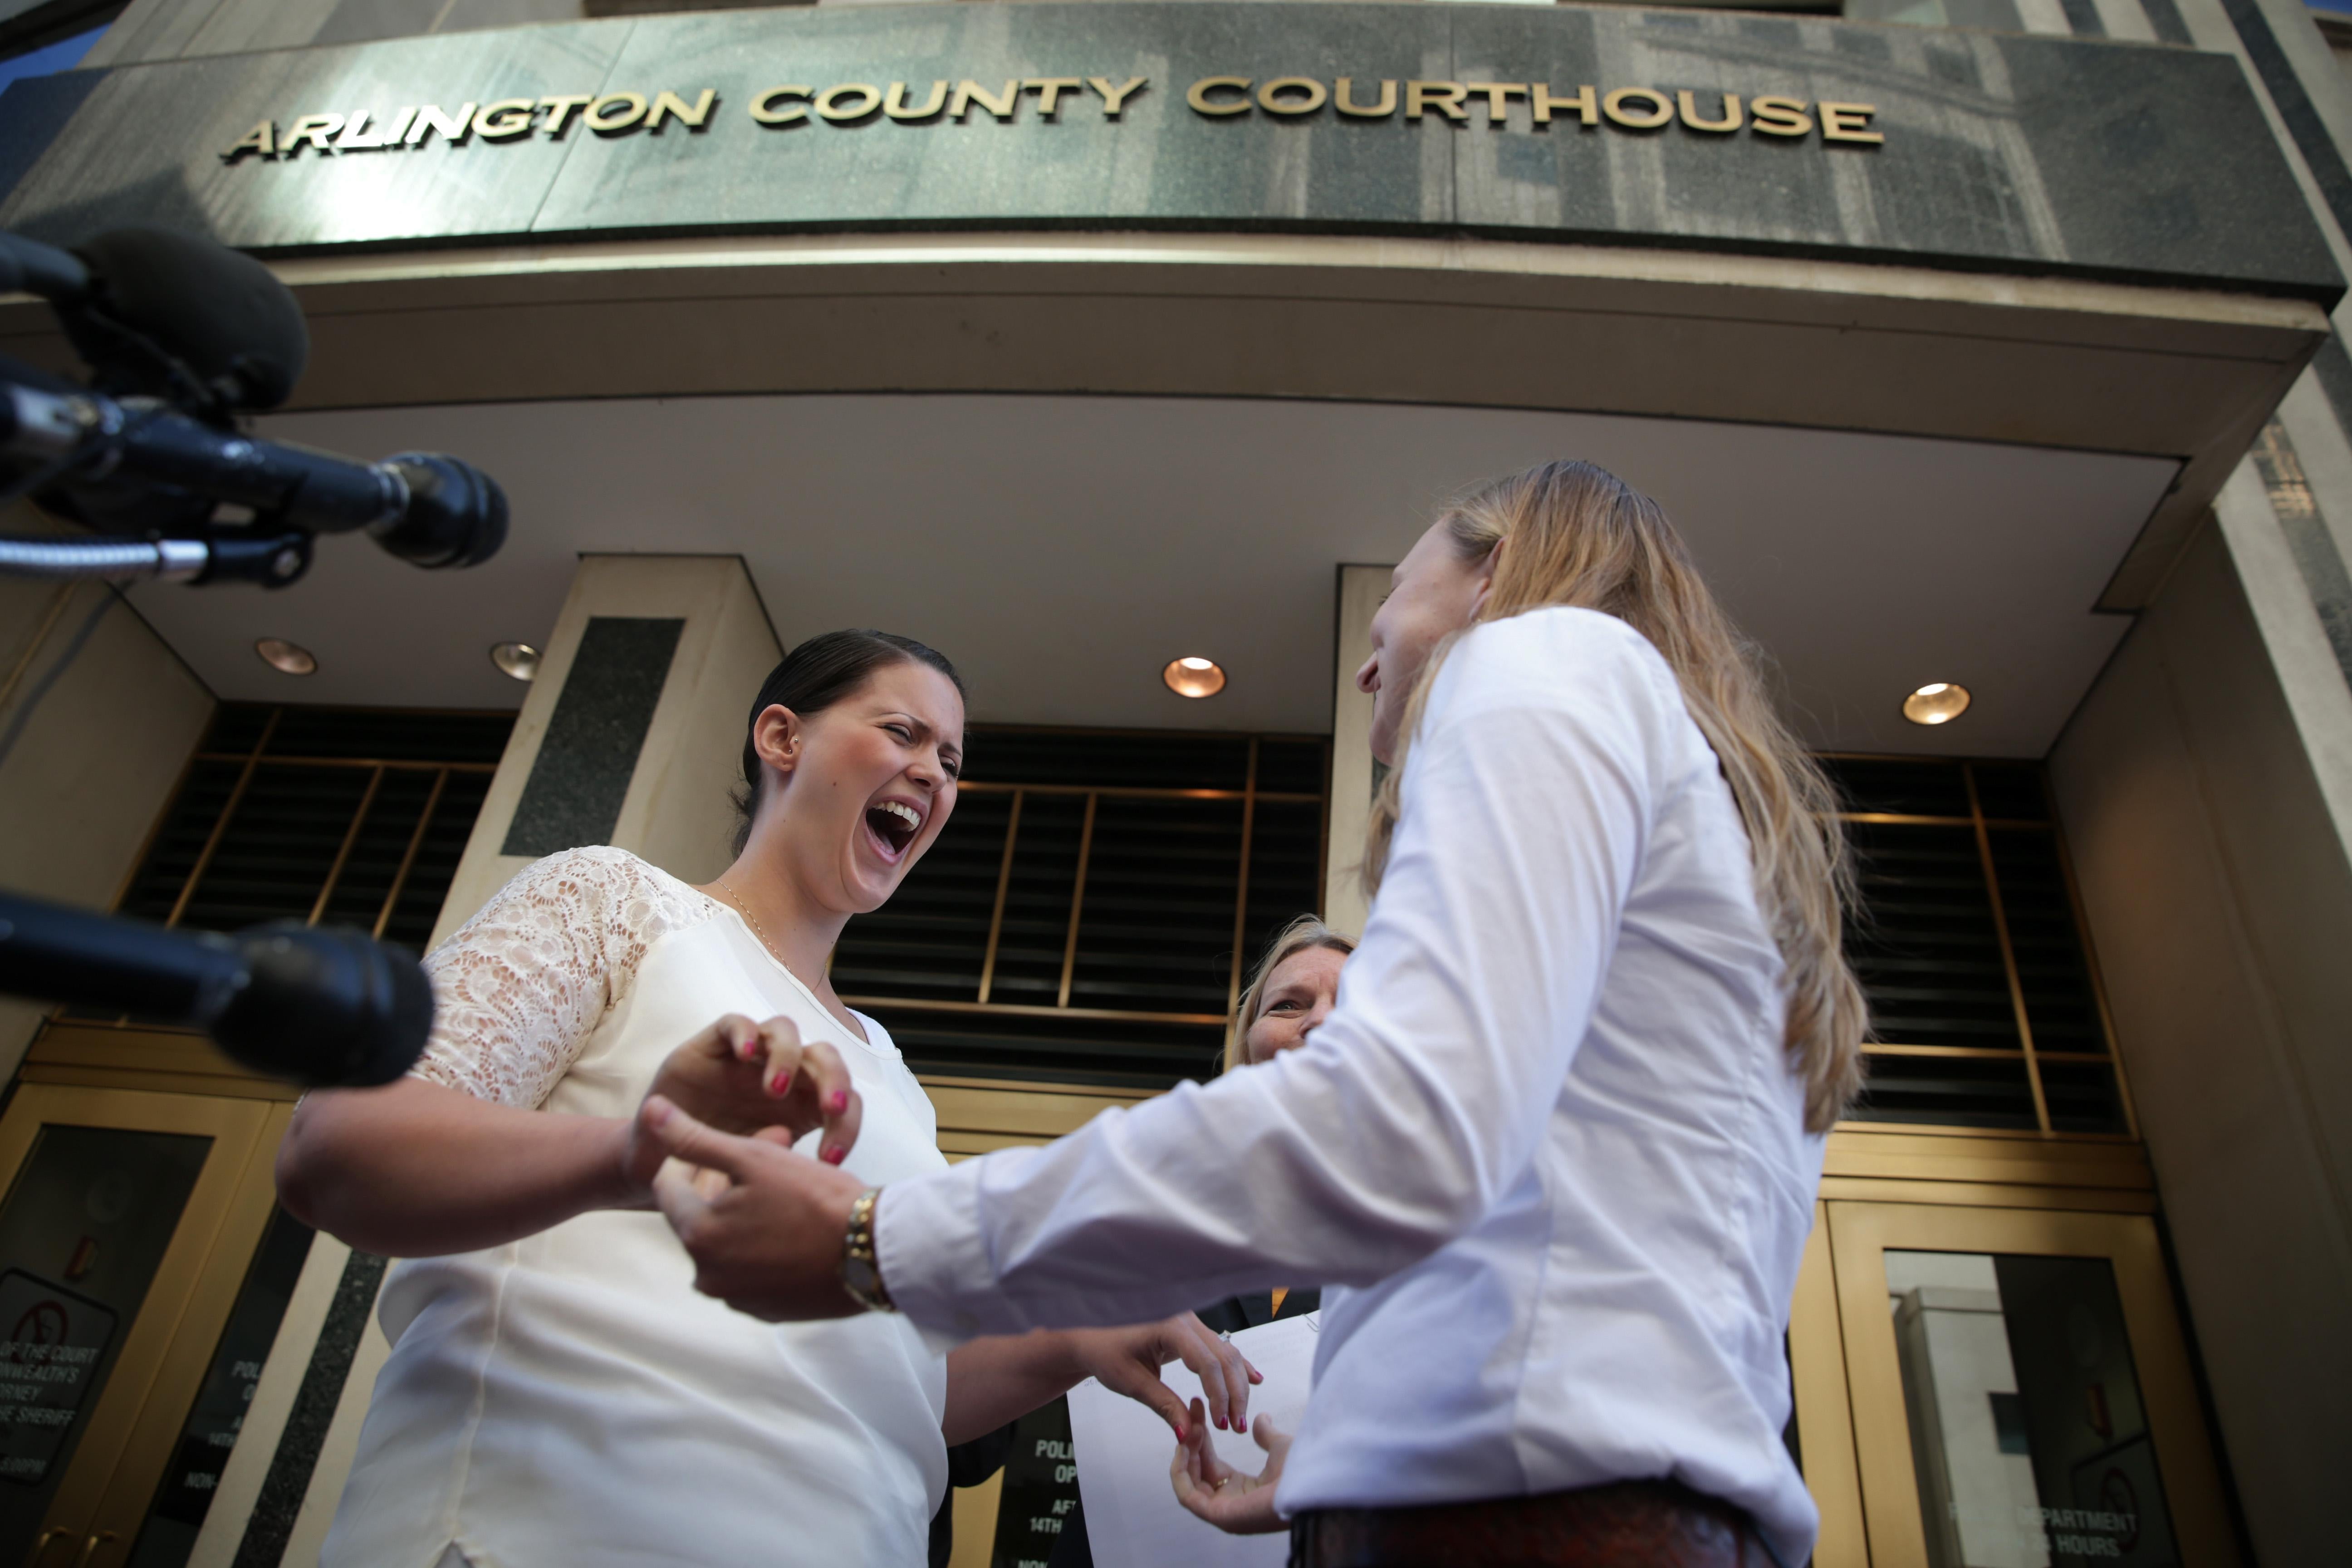 Two women get married outside a courthouse and look extremely happy.